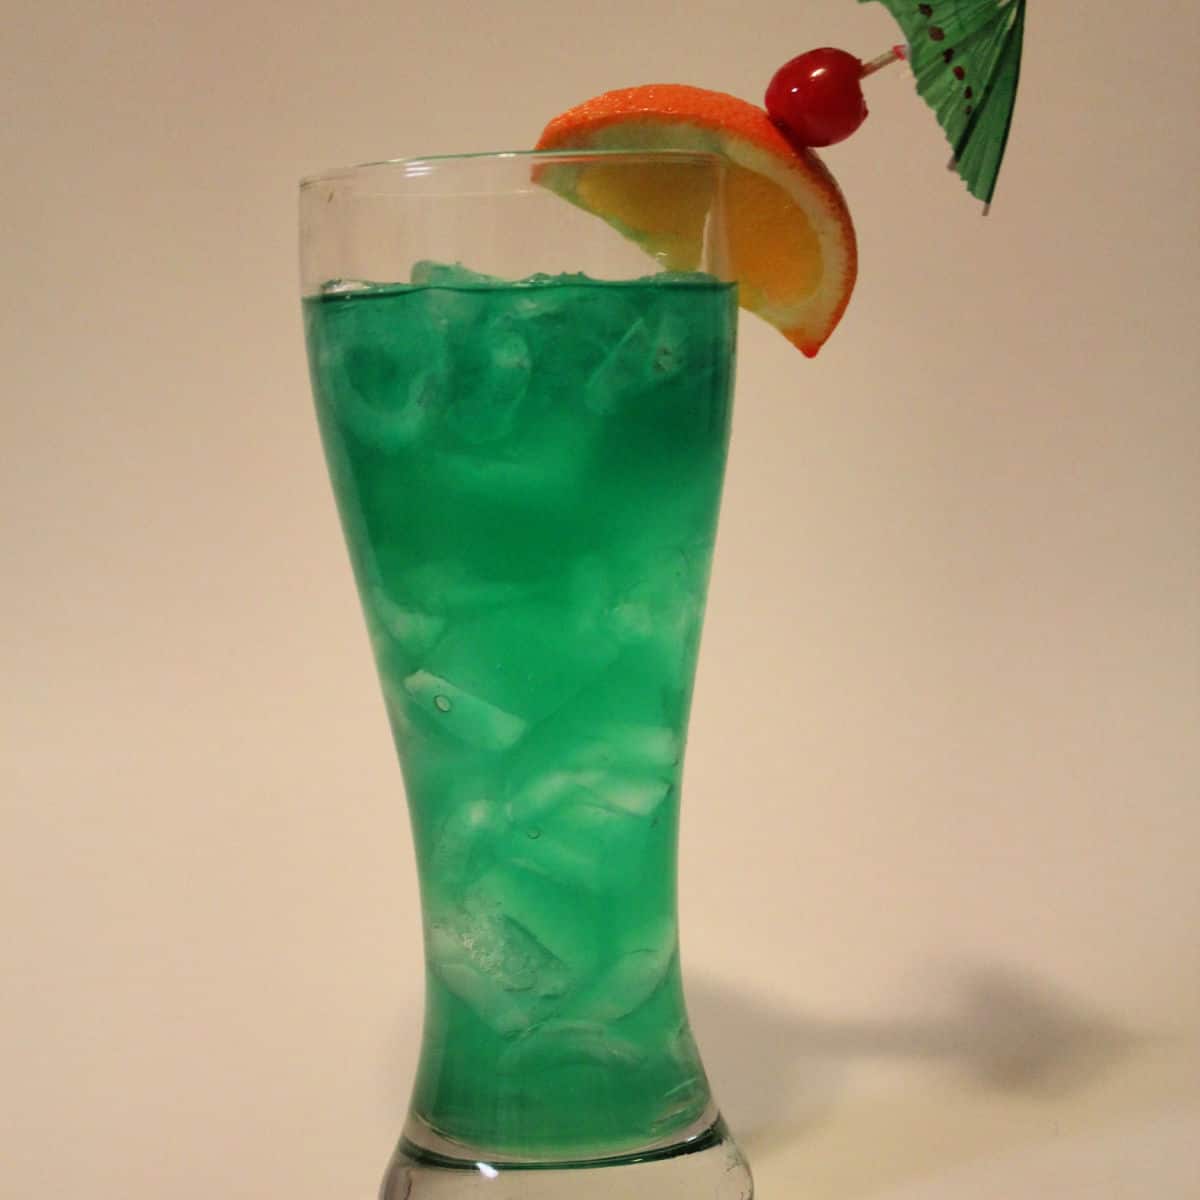 Bright green cocktail in a tall glass with orange slice and cherry garnish